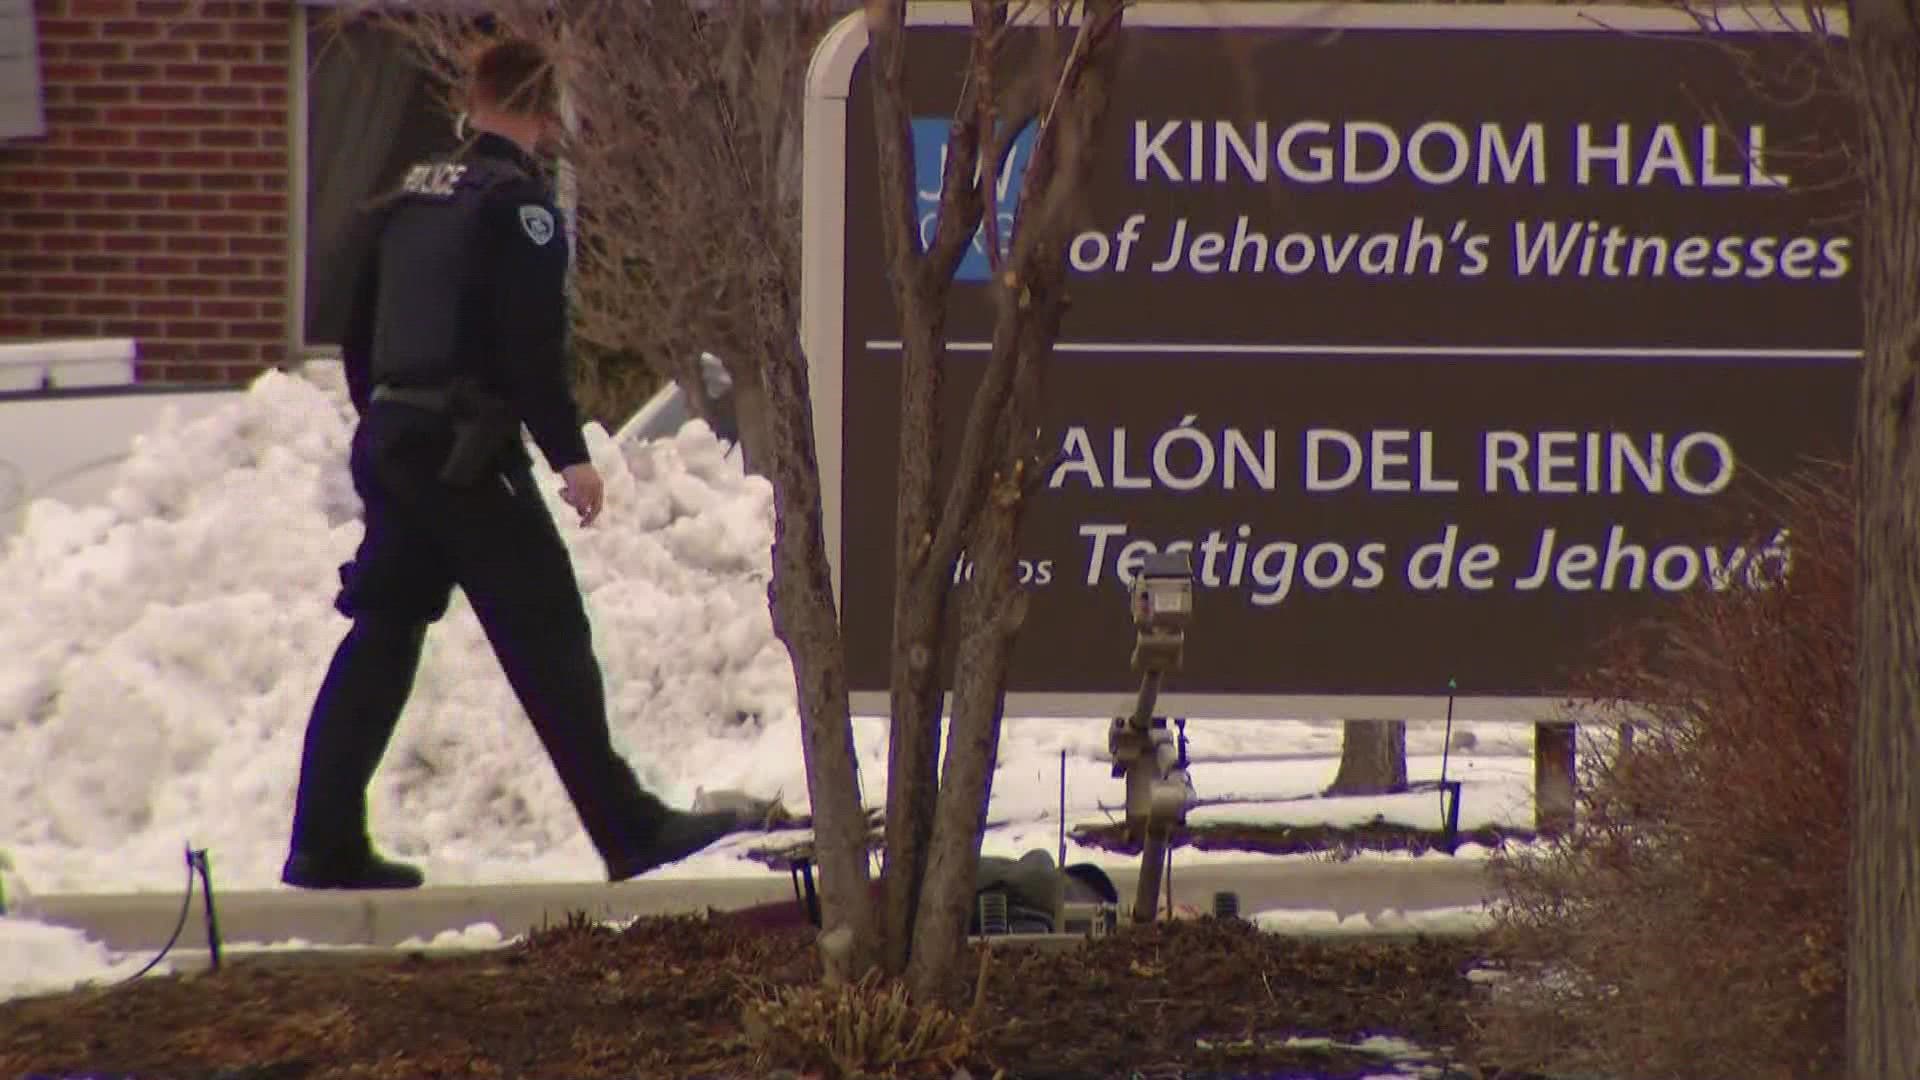 Thornton Police are investigating after a woman was shot and killed by her husband, who later killed himself at the Kingdom Hall in Thornton.